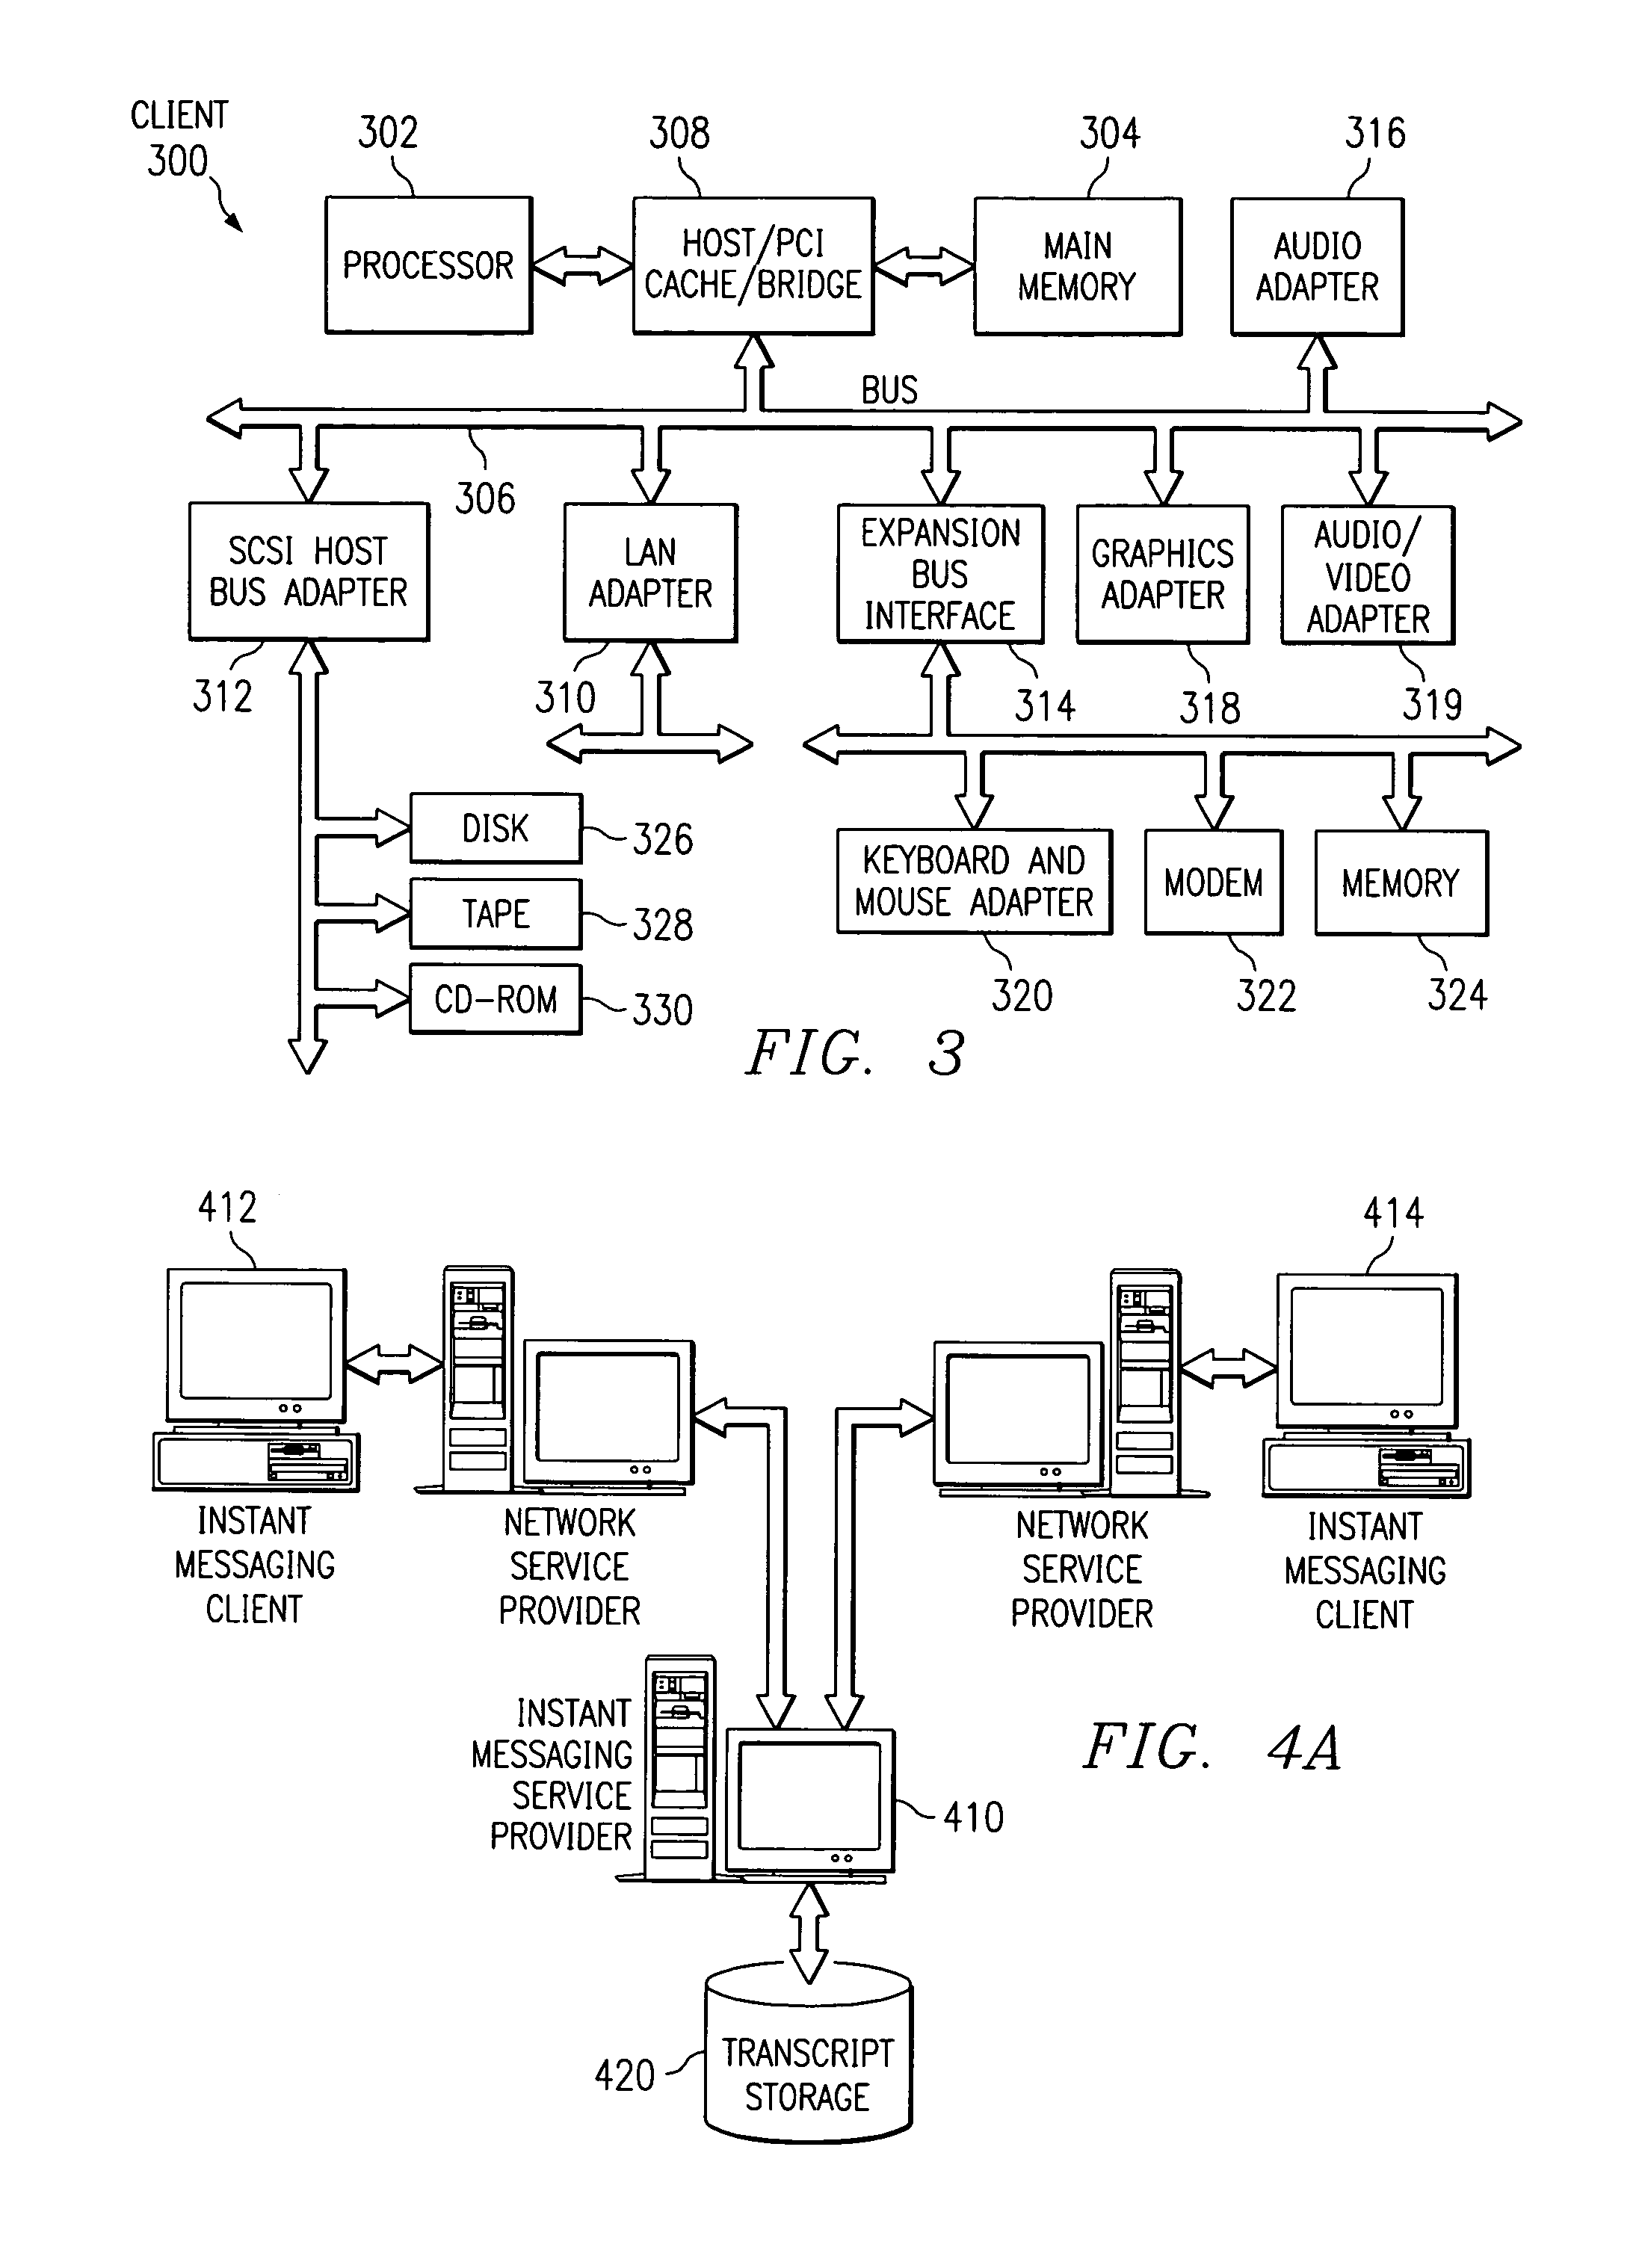 Apparatus and method for monitoring instant messaging accounts